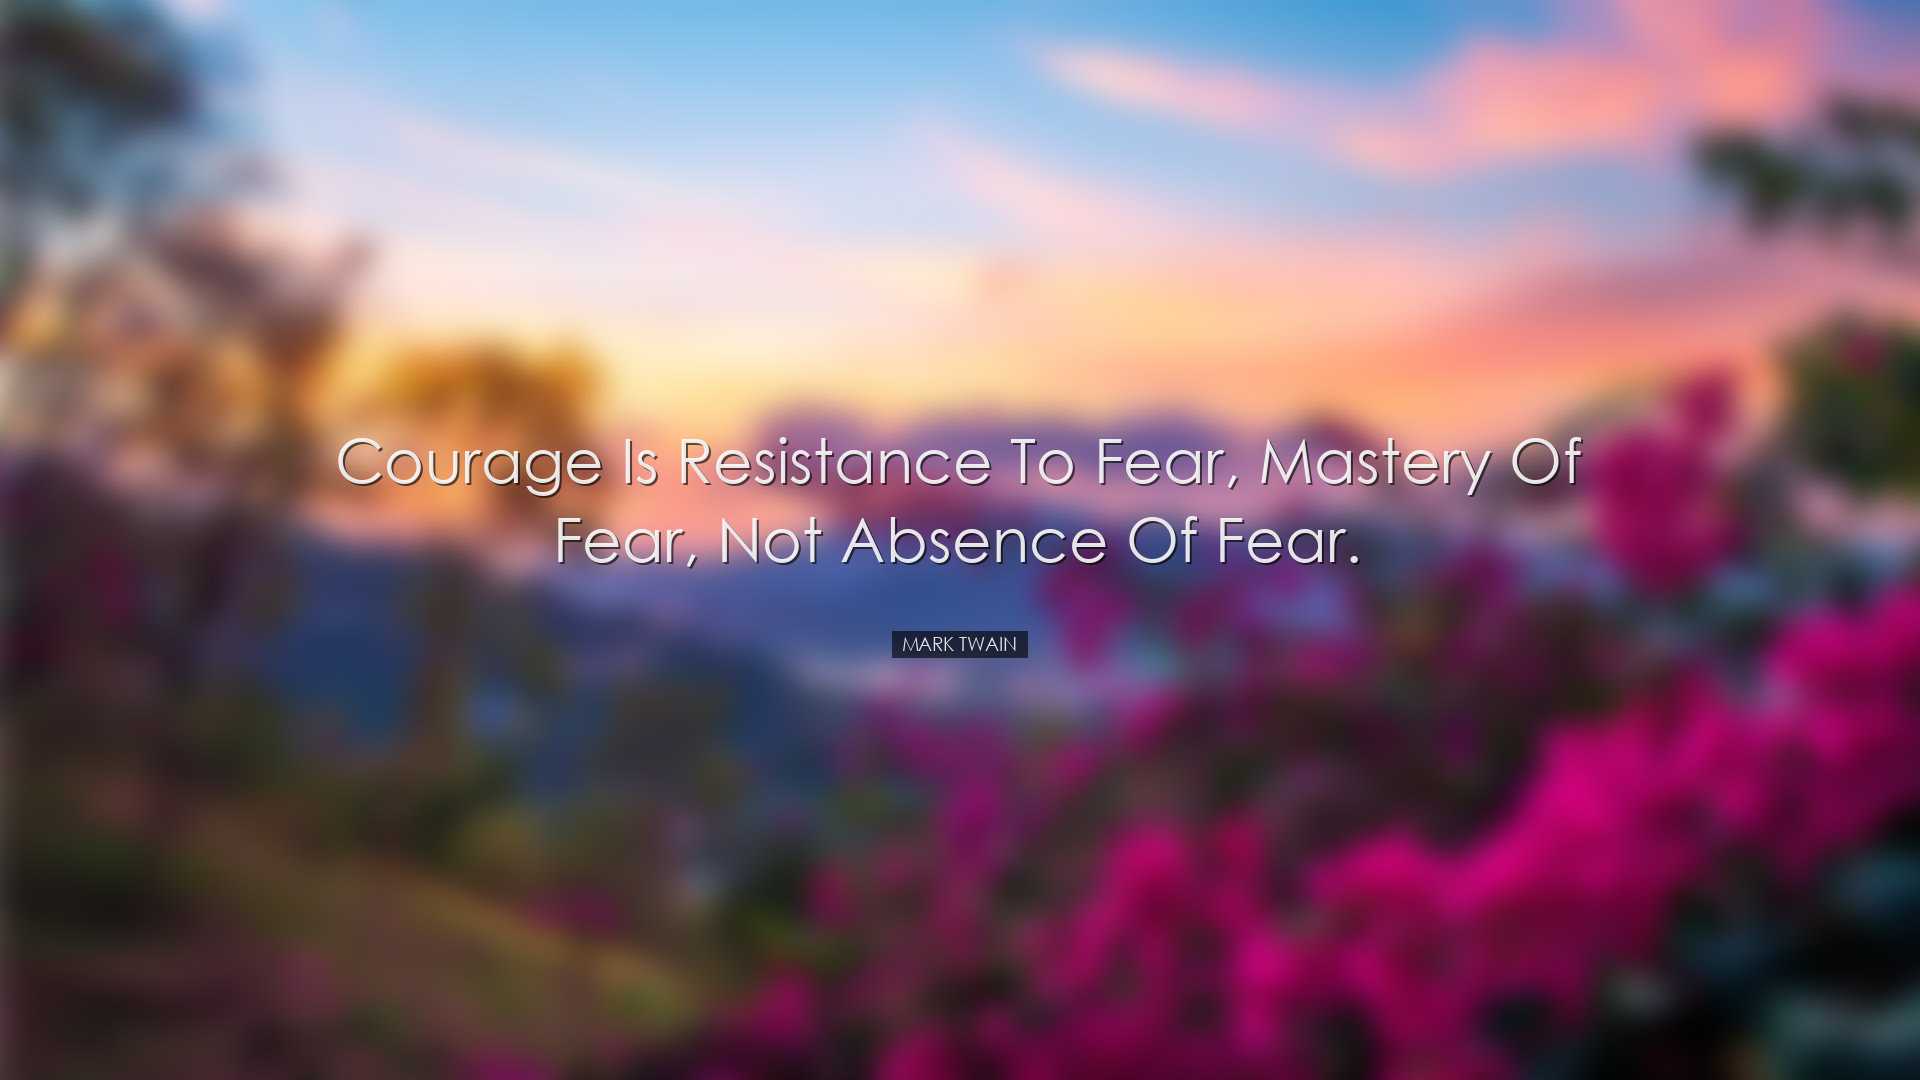 Courage is resistance to fear, mastery of fear, not absence of fea